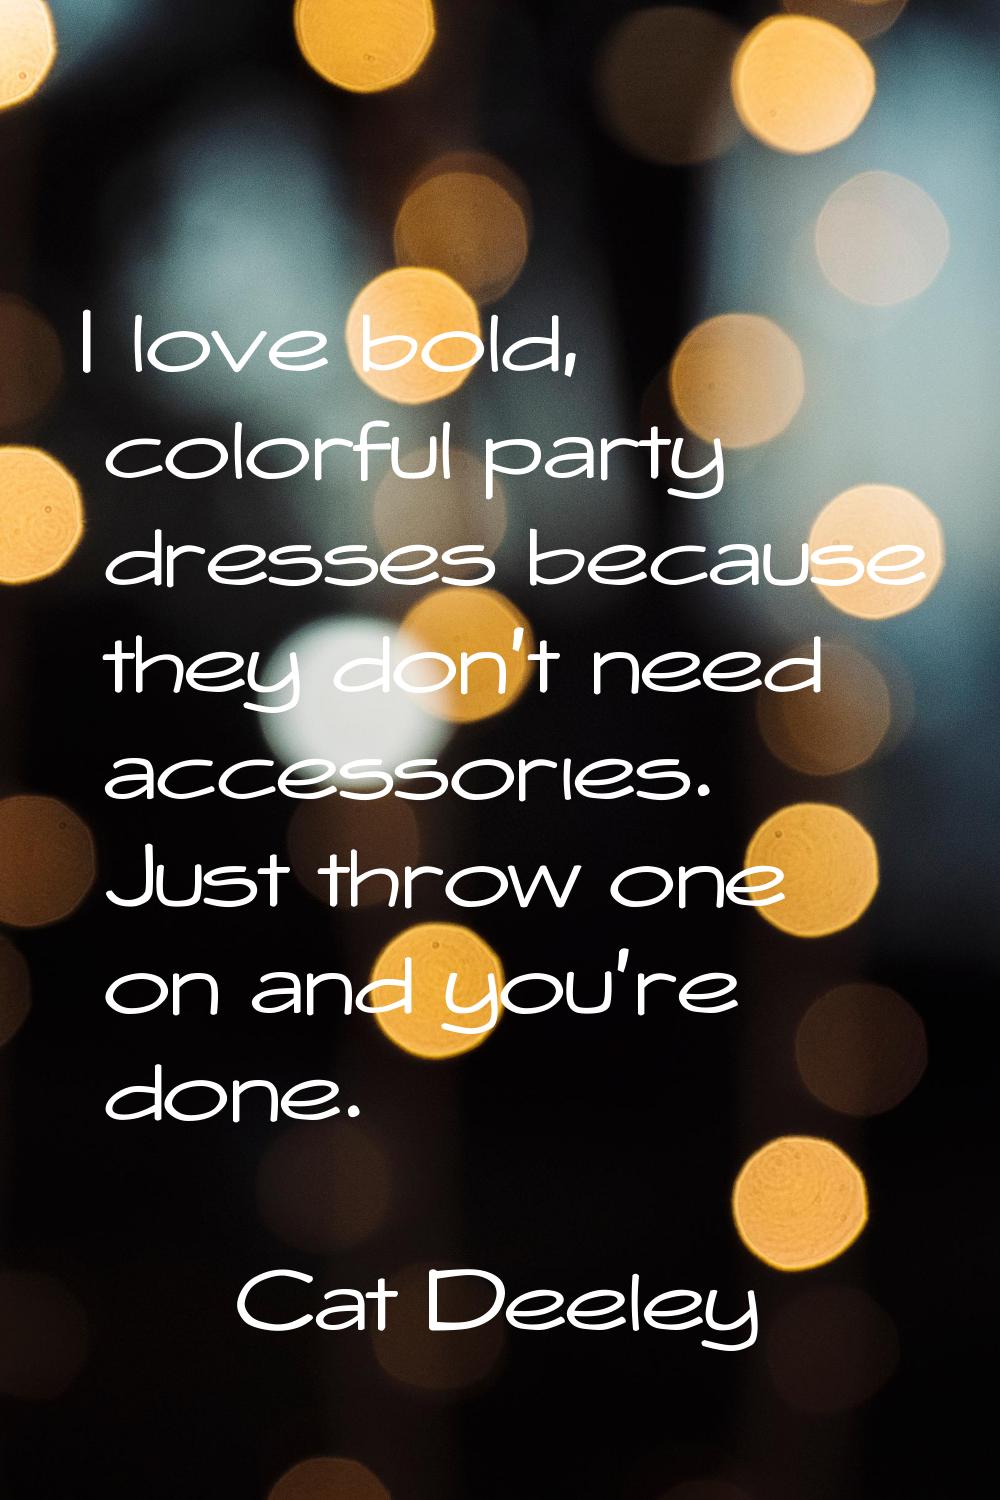 I love bold, colorful party dresses because they don't need accessories. Just throw one on and you'